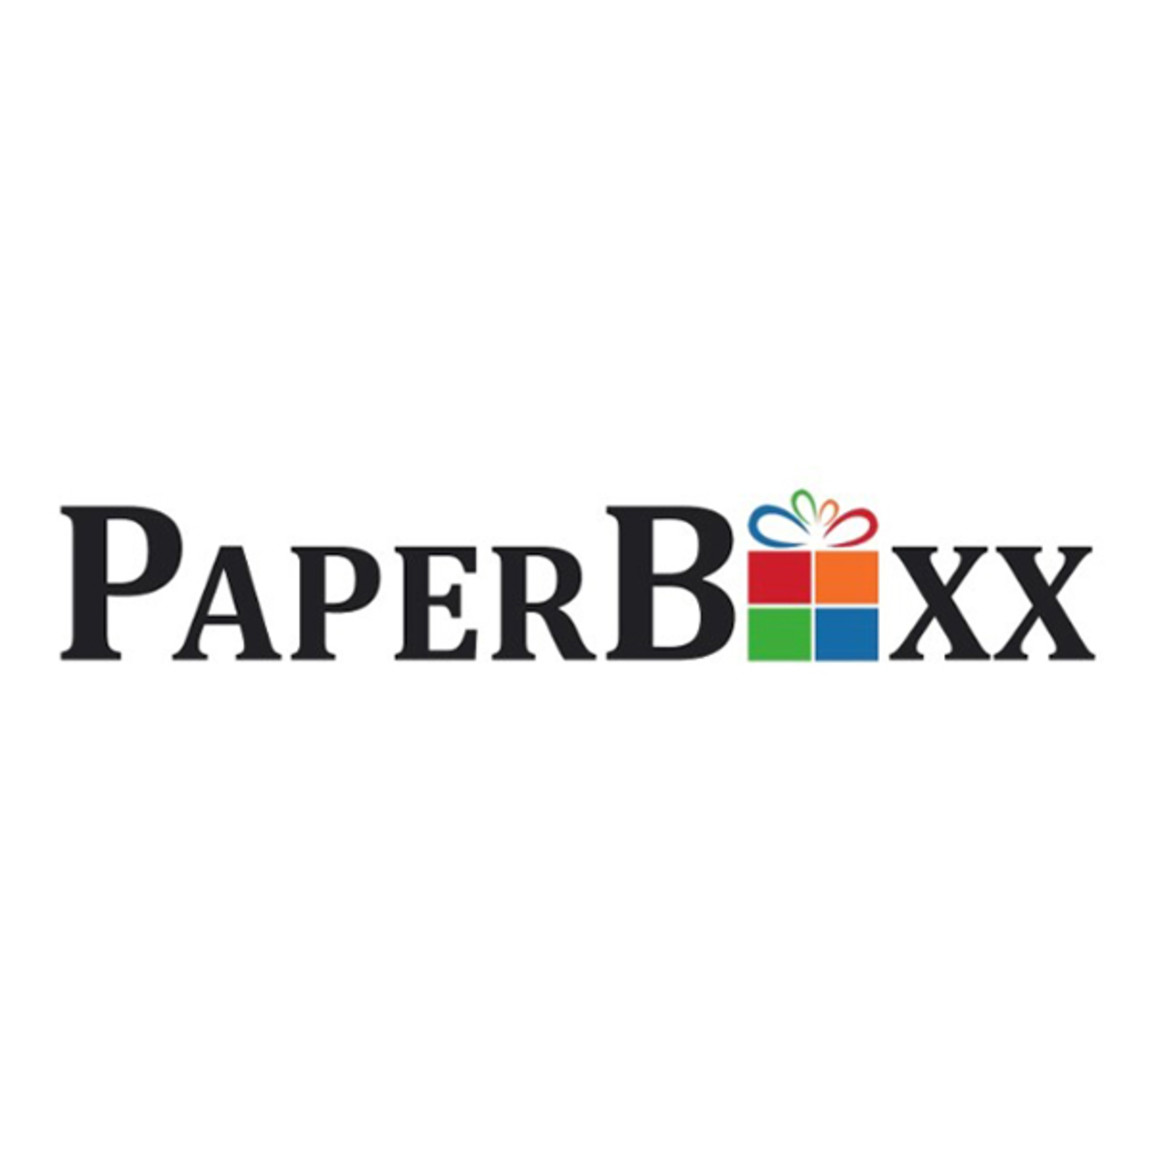 Download Paperboxx At Westfield North Lakes